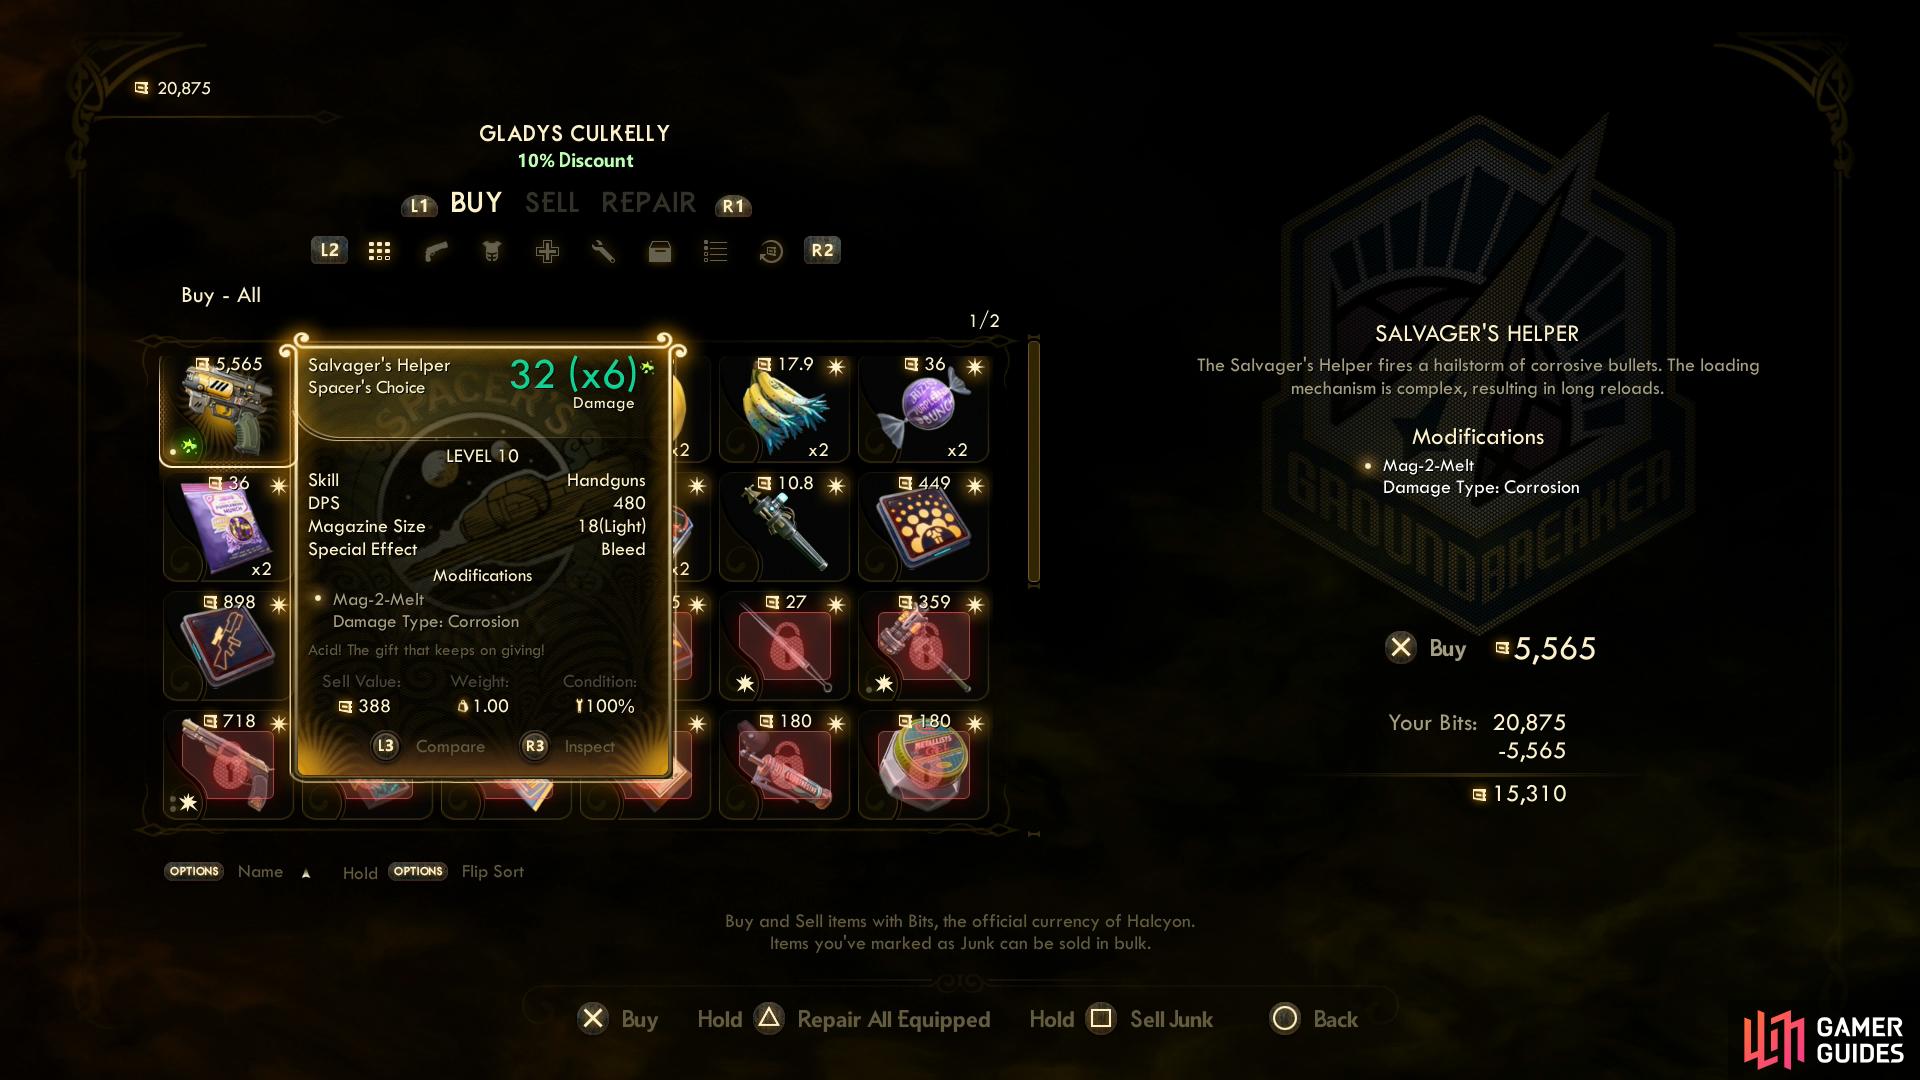 You can buy the unique Salvager's Helper gun from her.